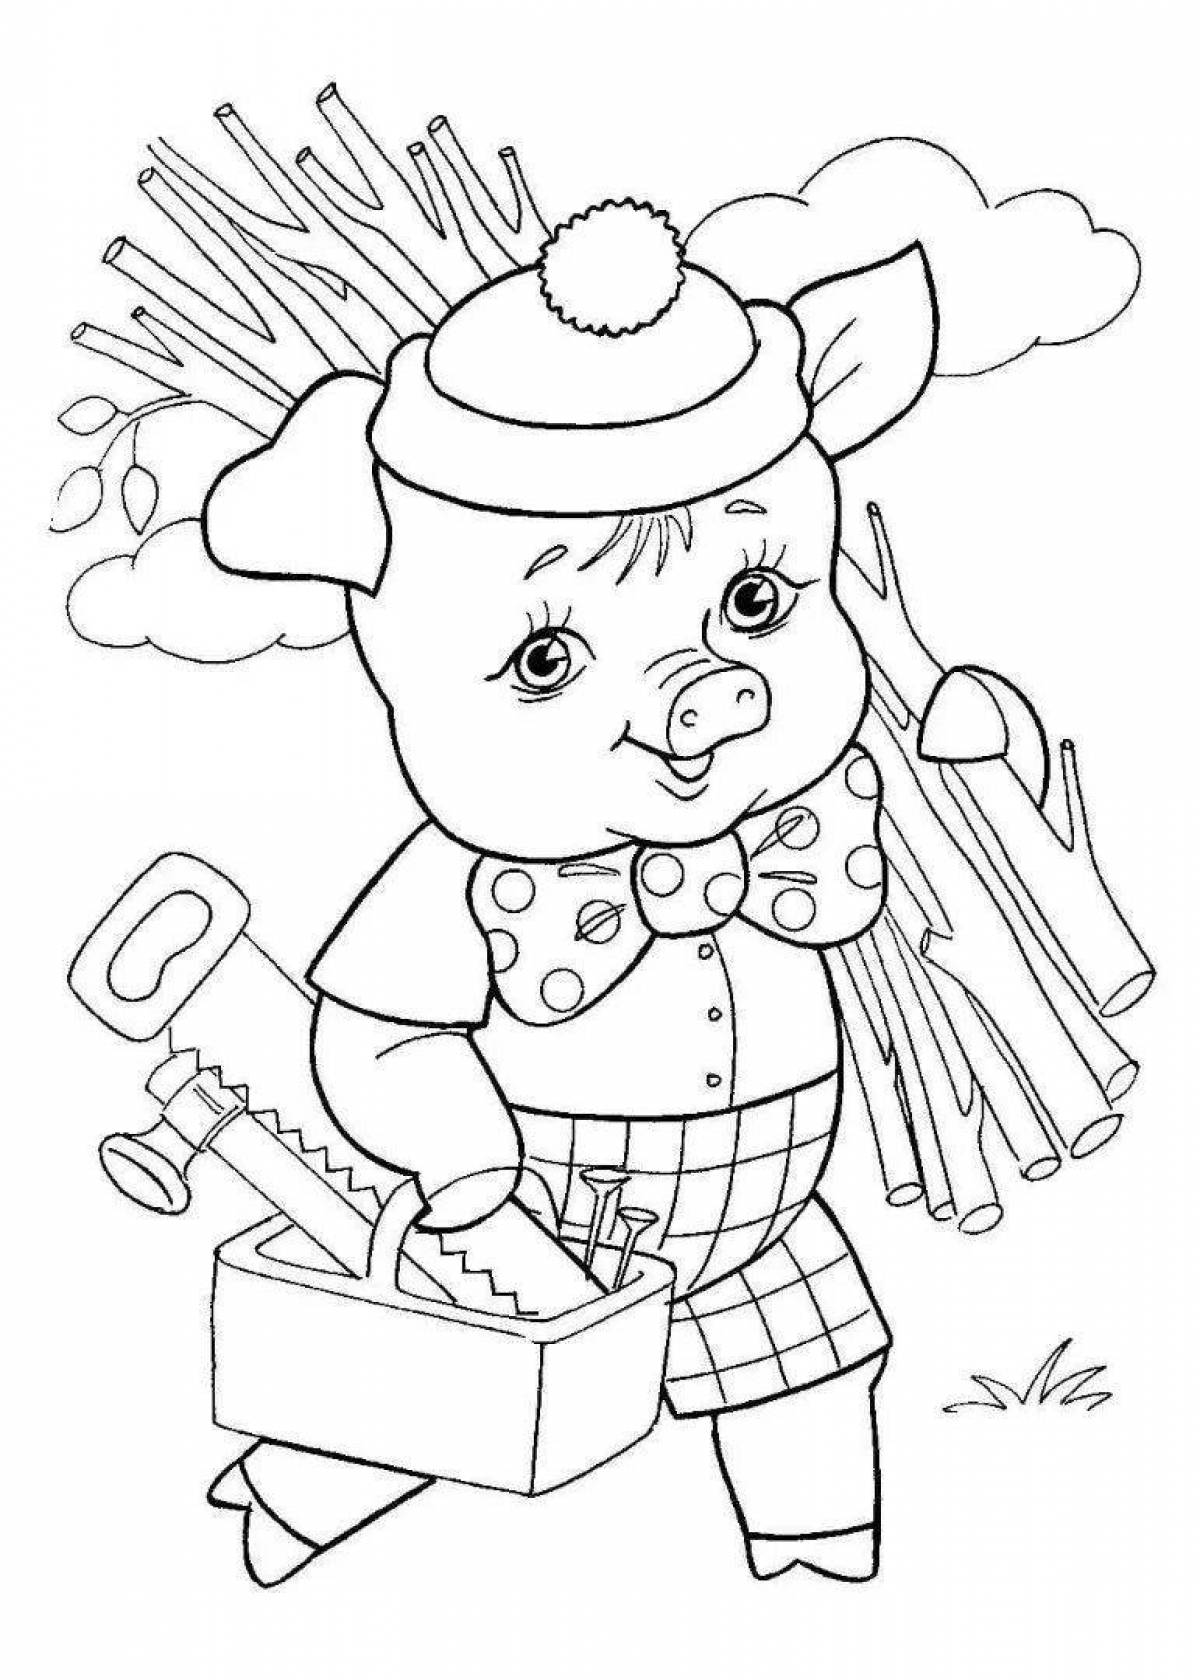 Three little pigs fairytale coloring book